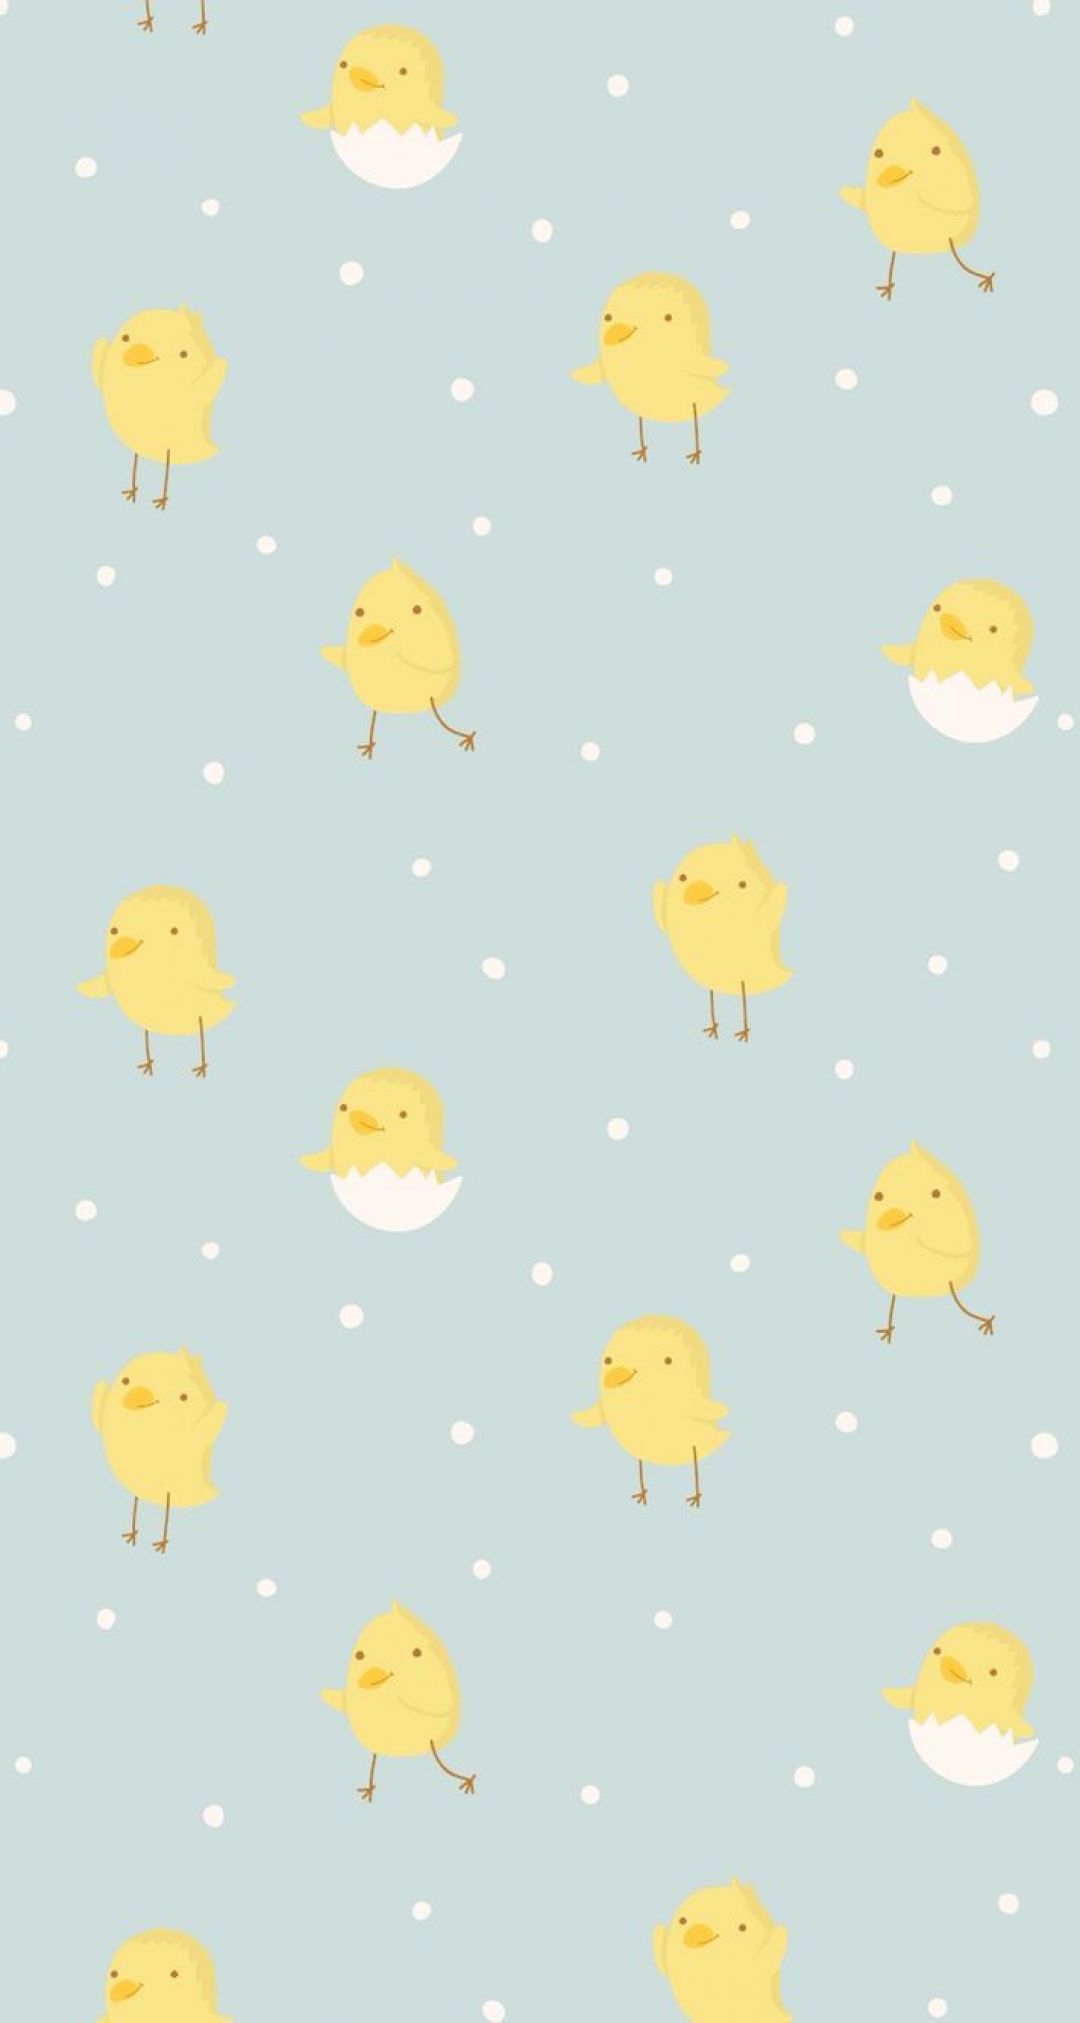 Cute baby chickens on a blue background - Easter